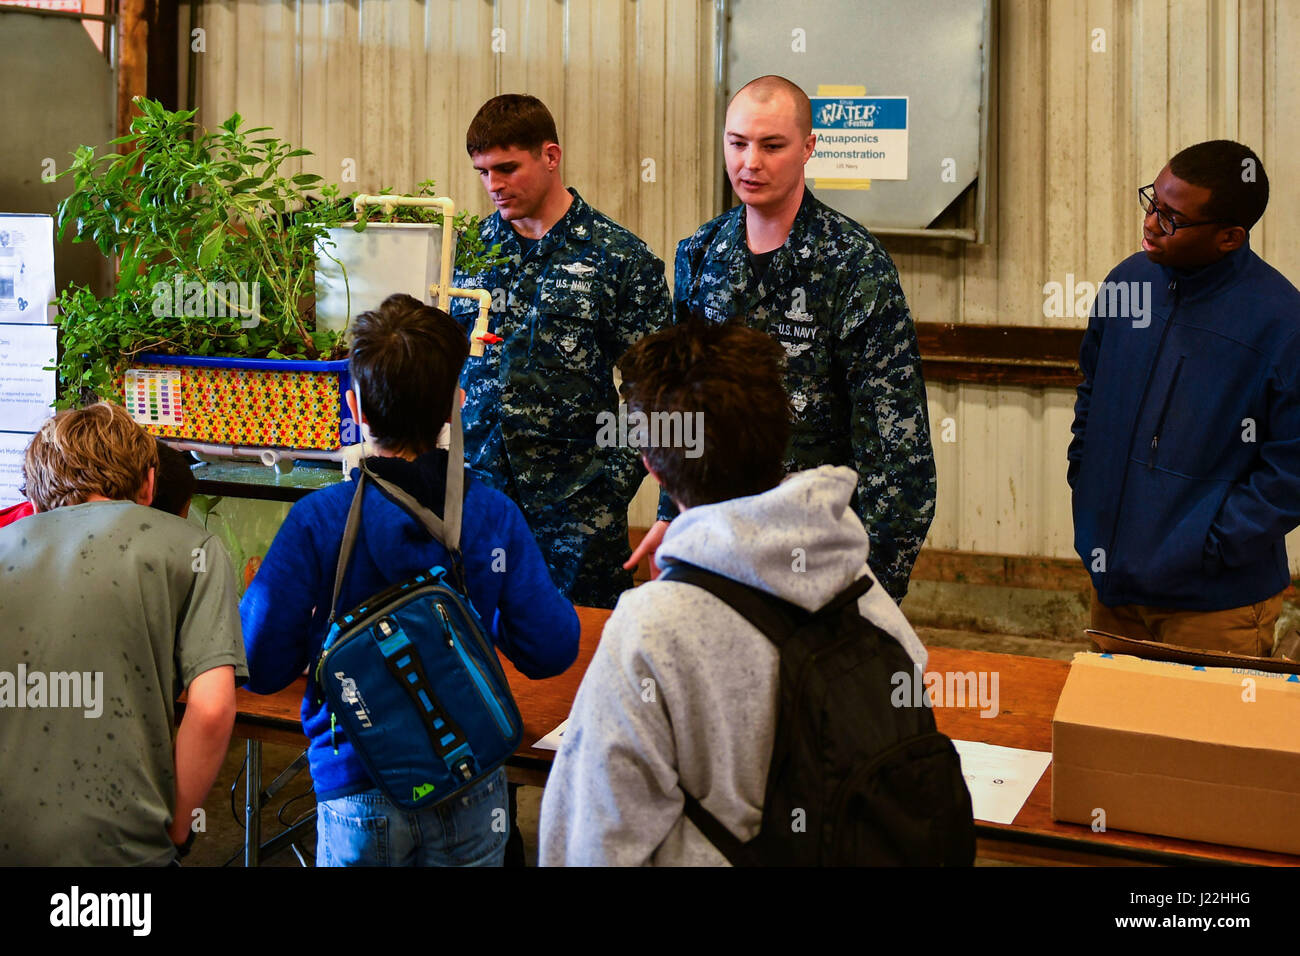 170418-N-SH284-011 BREMERTON, Wash. (April 18, 2017) Hospital Corpsman 1st Class John LaPage (left), Hospital Corpsman 1st Class Nick Behel (center) and Hospitalman Roy Wells, assigned to Naval Hospital Bremerton, teach third and fourth grade students from Kitsap County schools about the water cycle at the Kitsap Water Festival, held at the Kitsap County Fairgrounds. The Kitsap Water Festival is a day of learning about and celebrating water. Education experts, environmental professionals, storytellers, entertainers and members of the community set up presentations and exhibits. (U.S. Navy phot Stock Photo